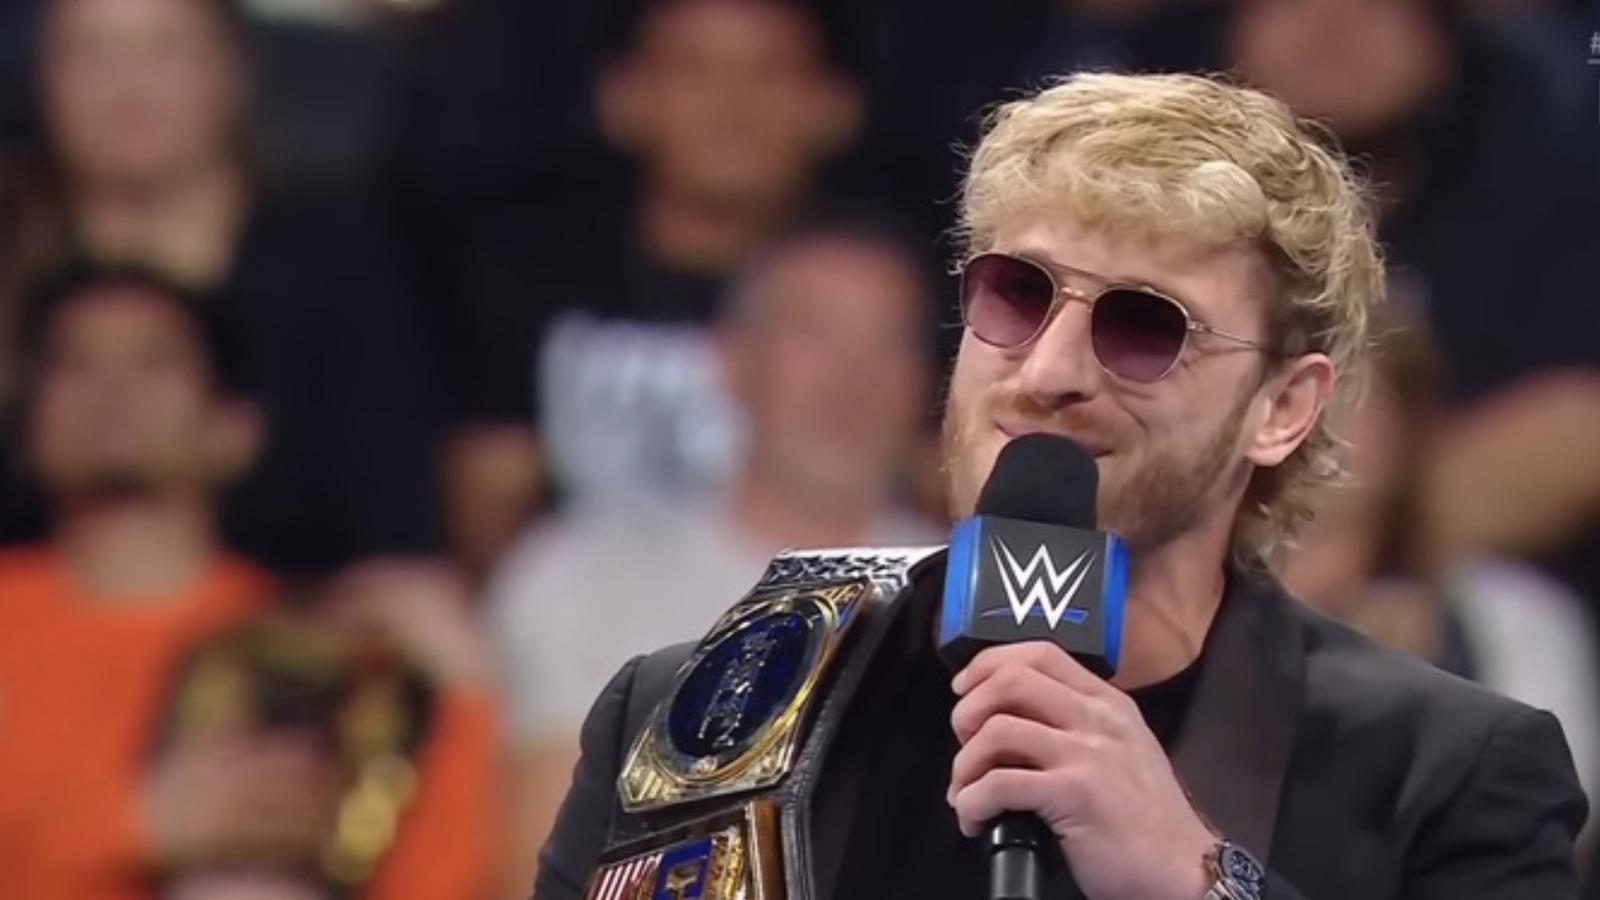 Logan Paul has taken the WWE world by storm, as the United States Champion boasts a strong record with the company